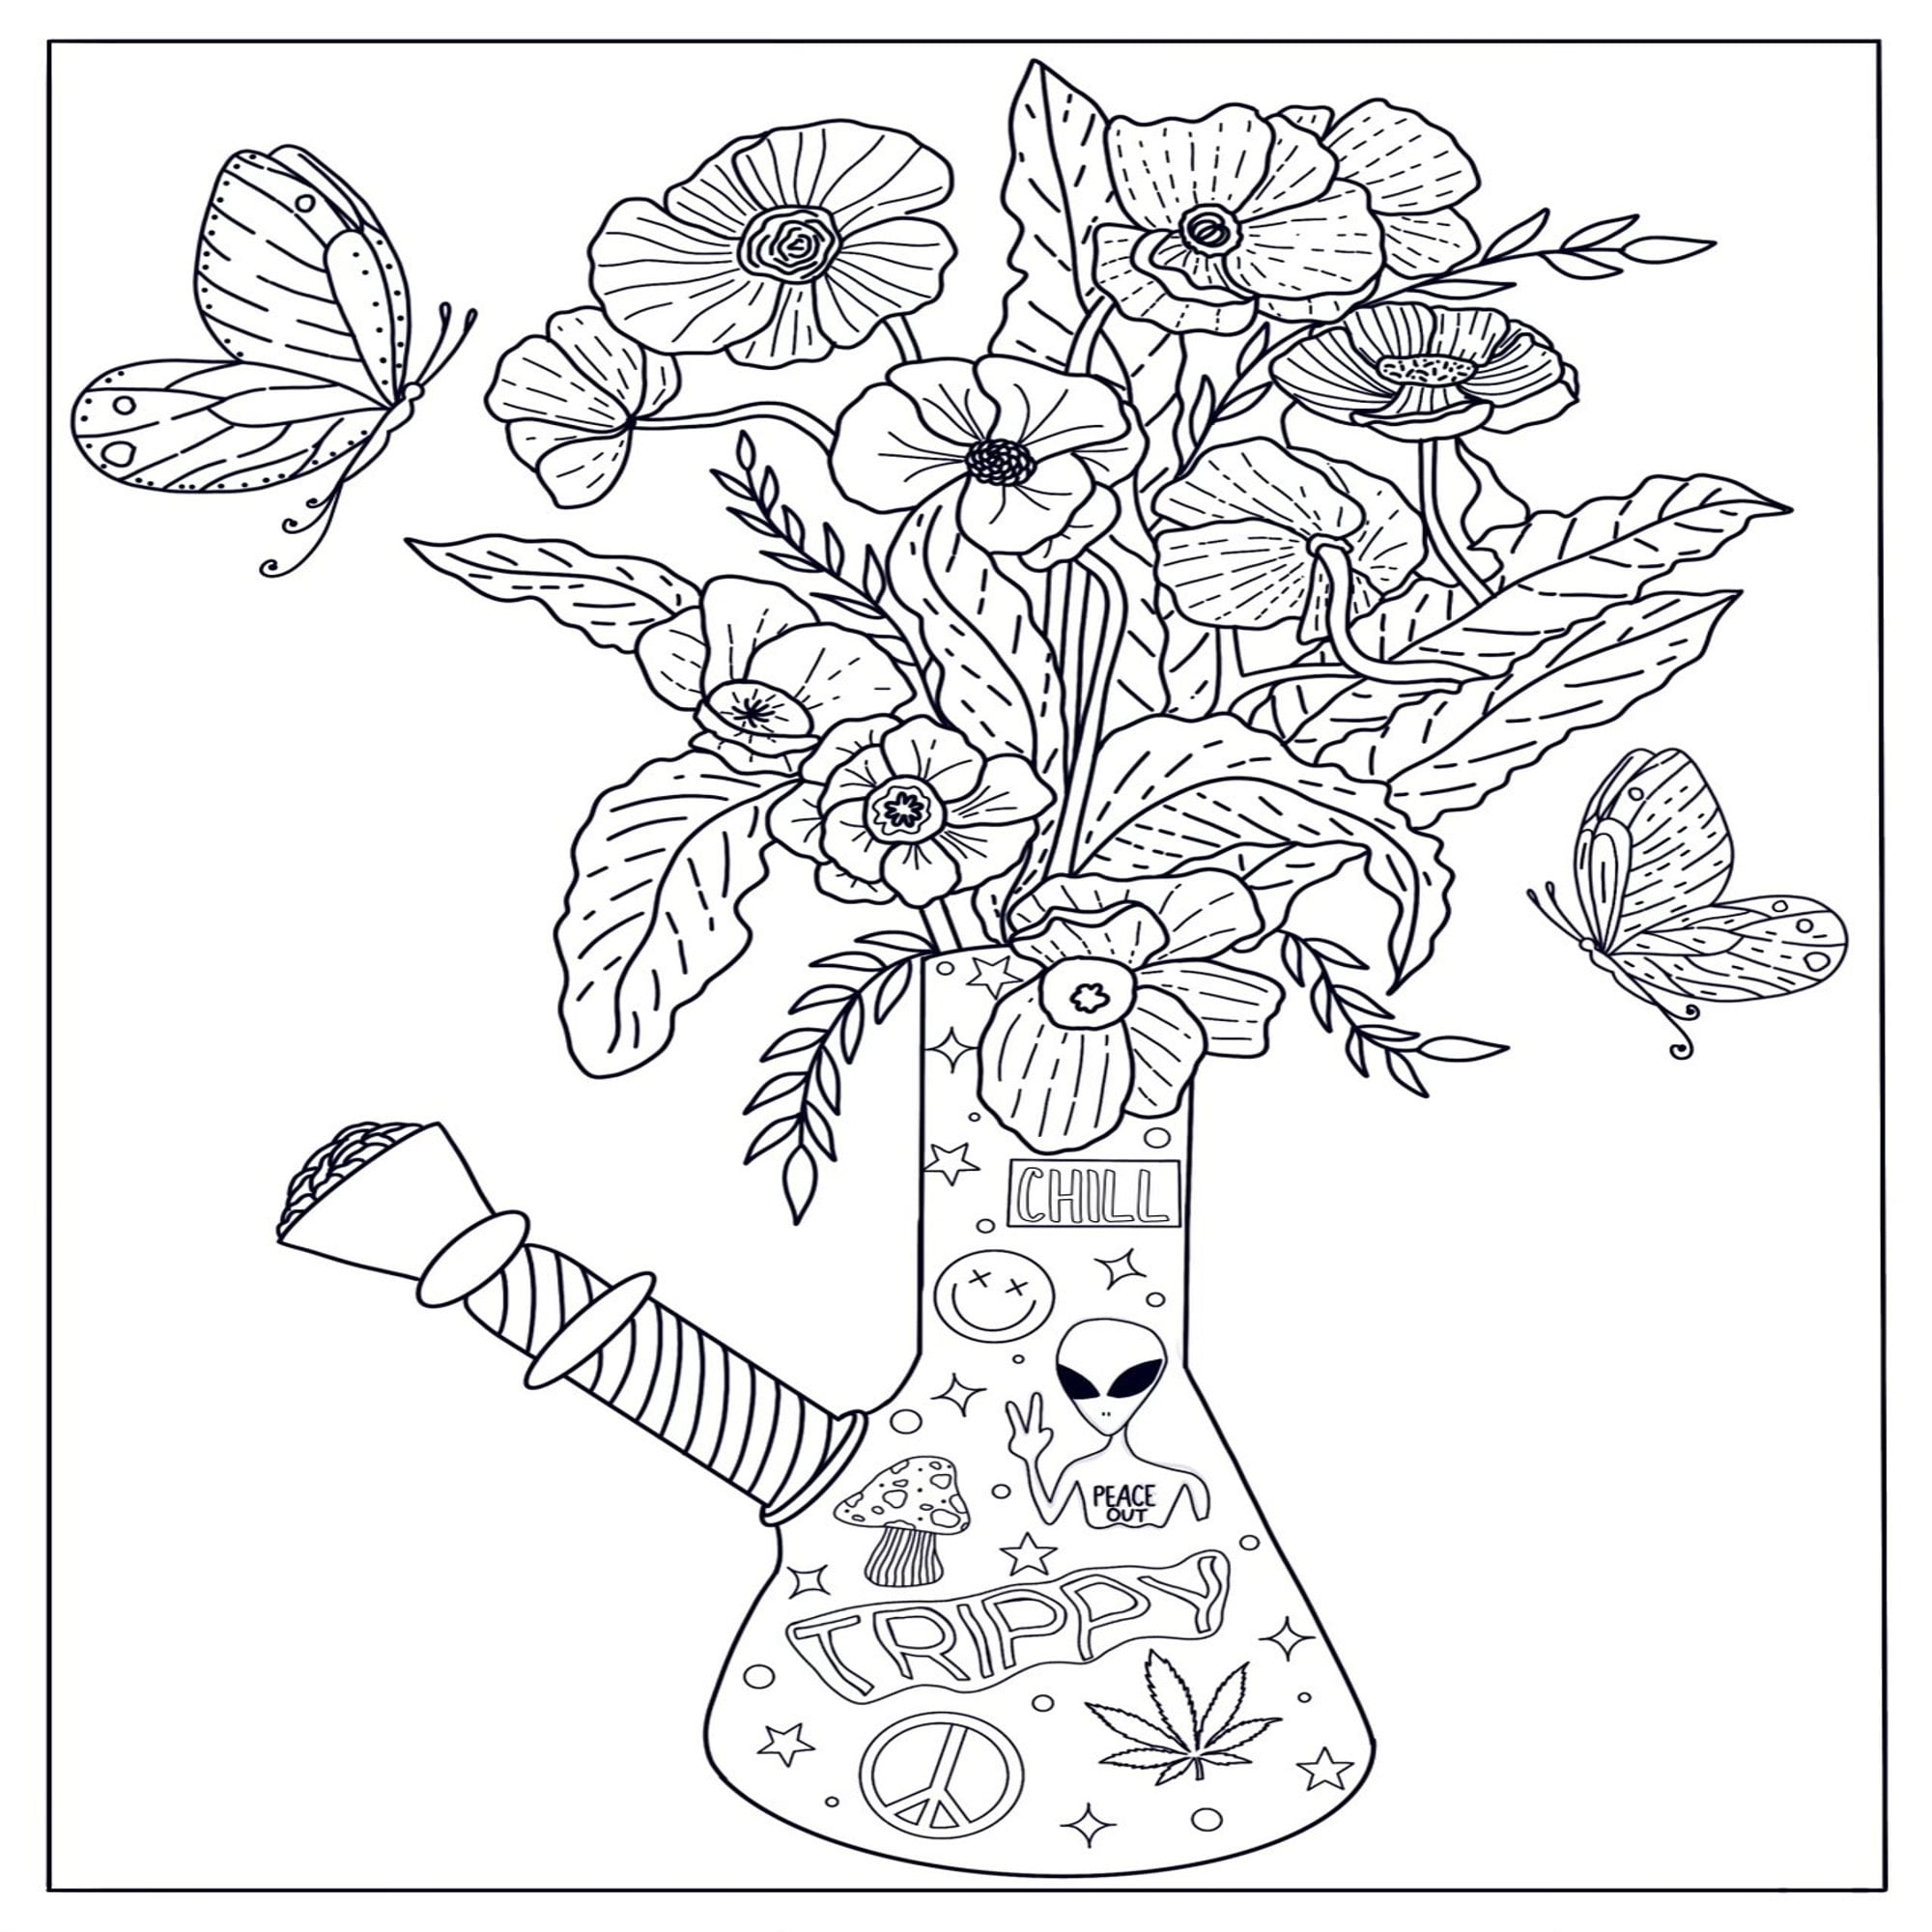 adult coloring pages already colored